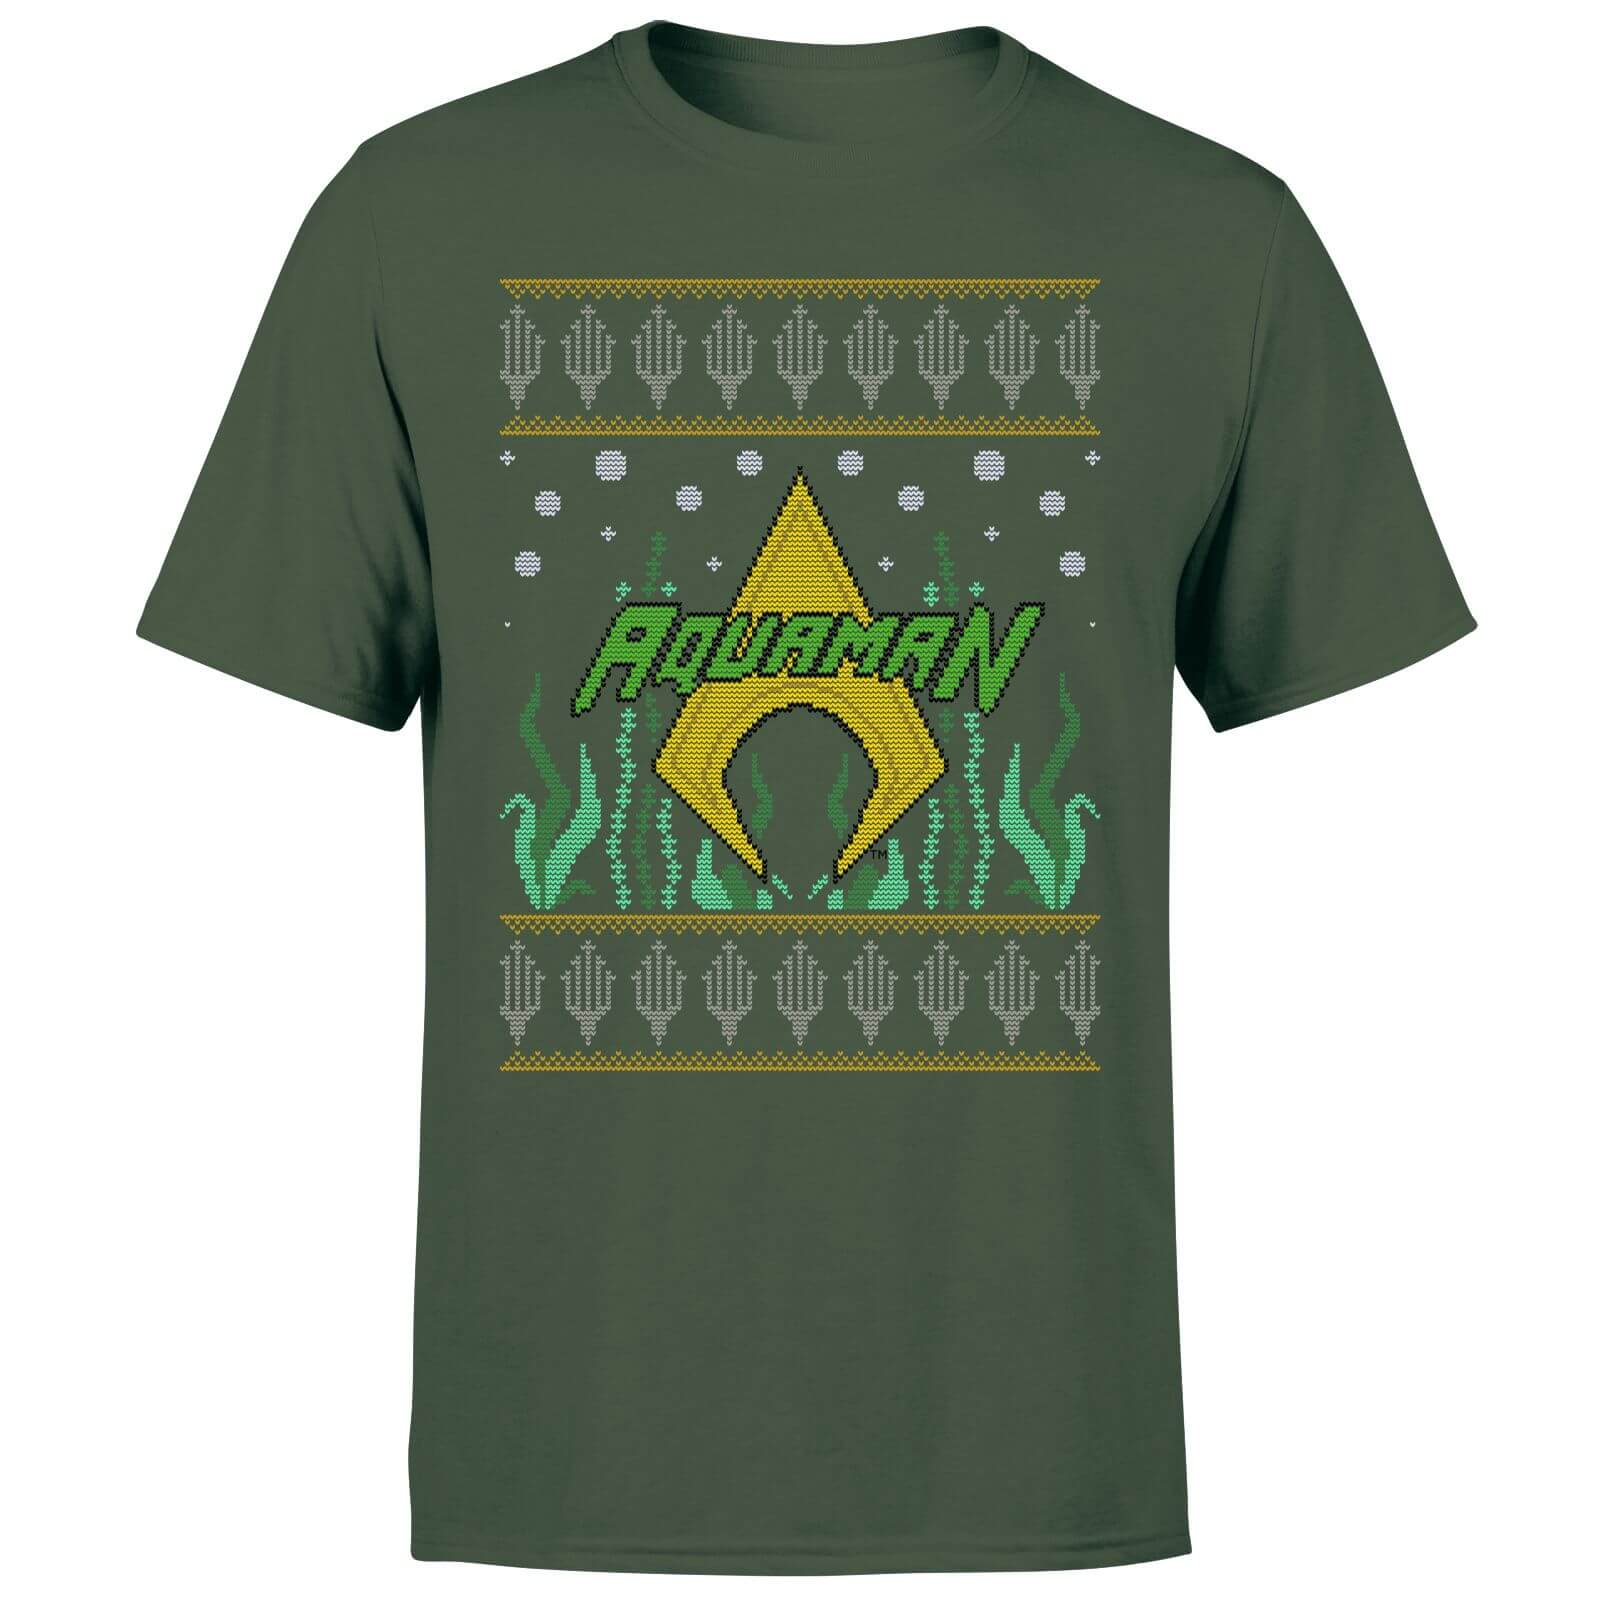 DC Aquaman Knit Men's Christmas T-Shirt - Forest Green - S - Forest Green